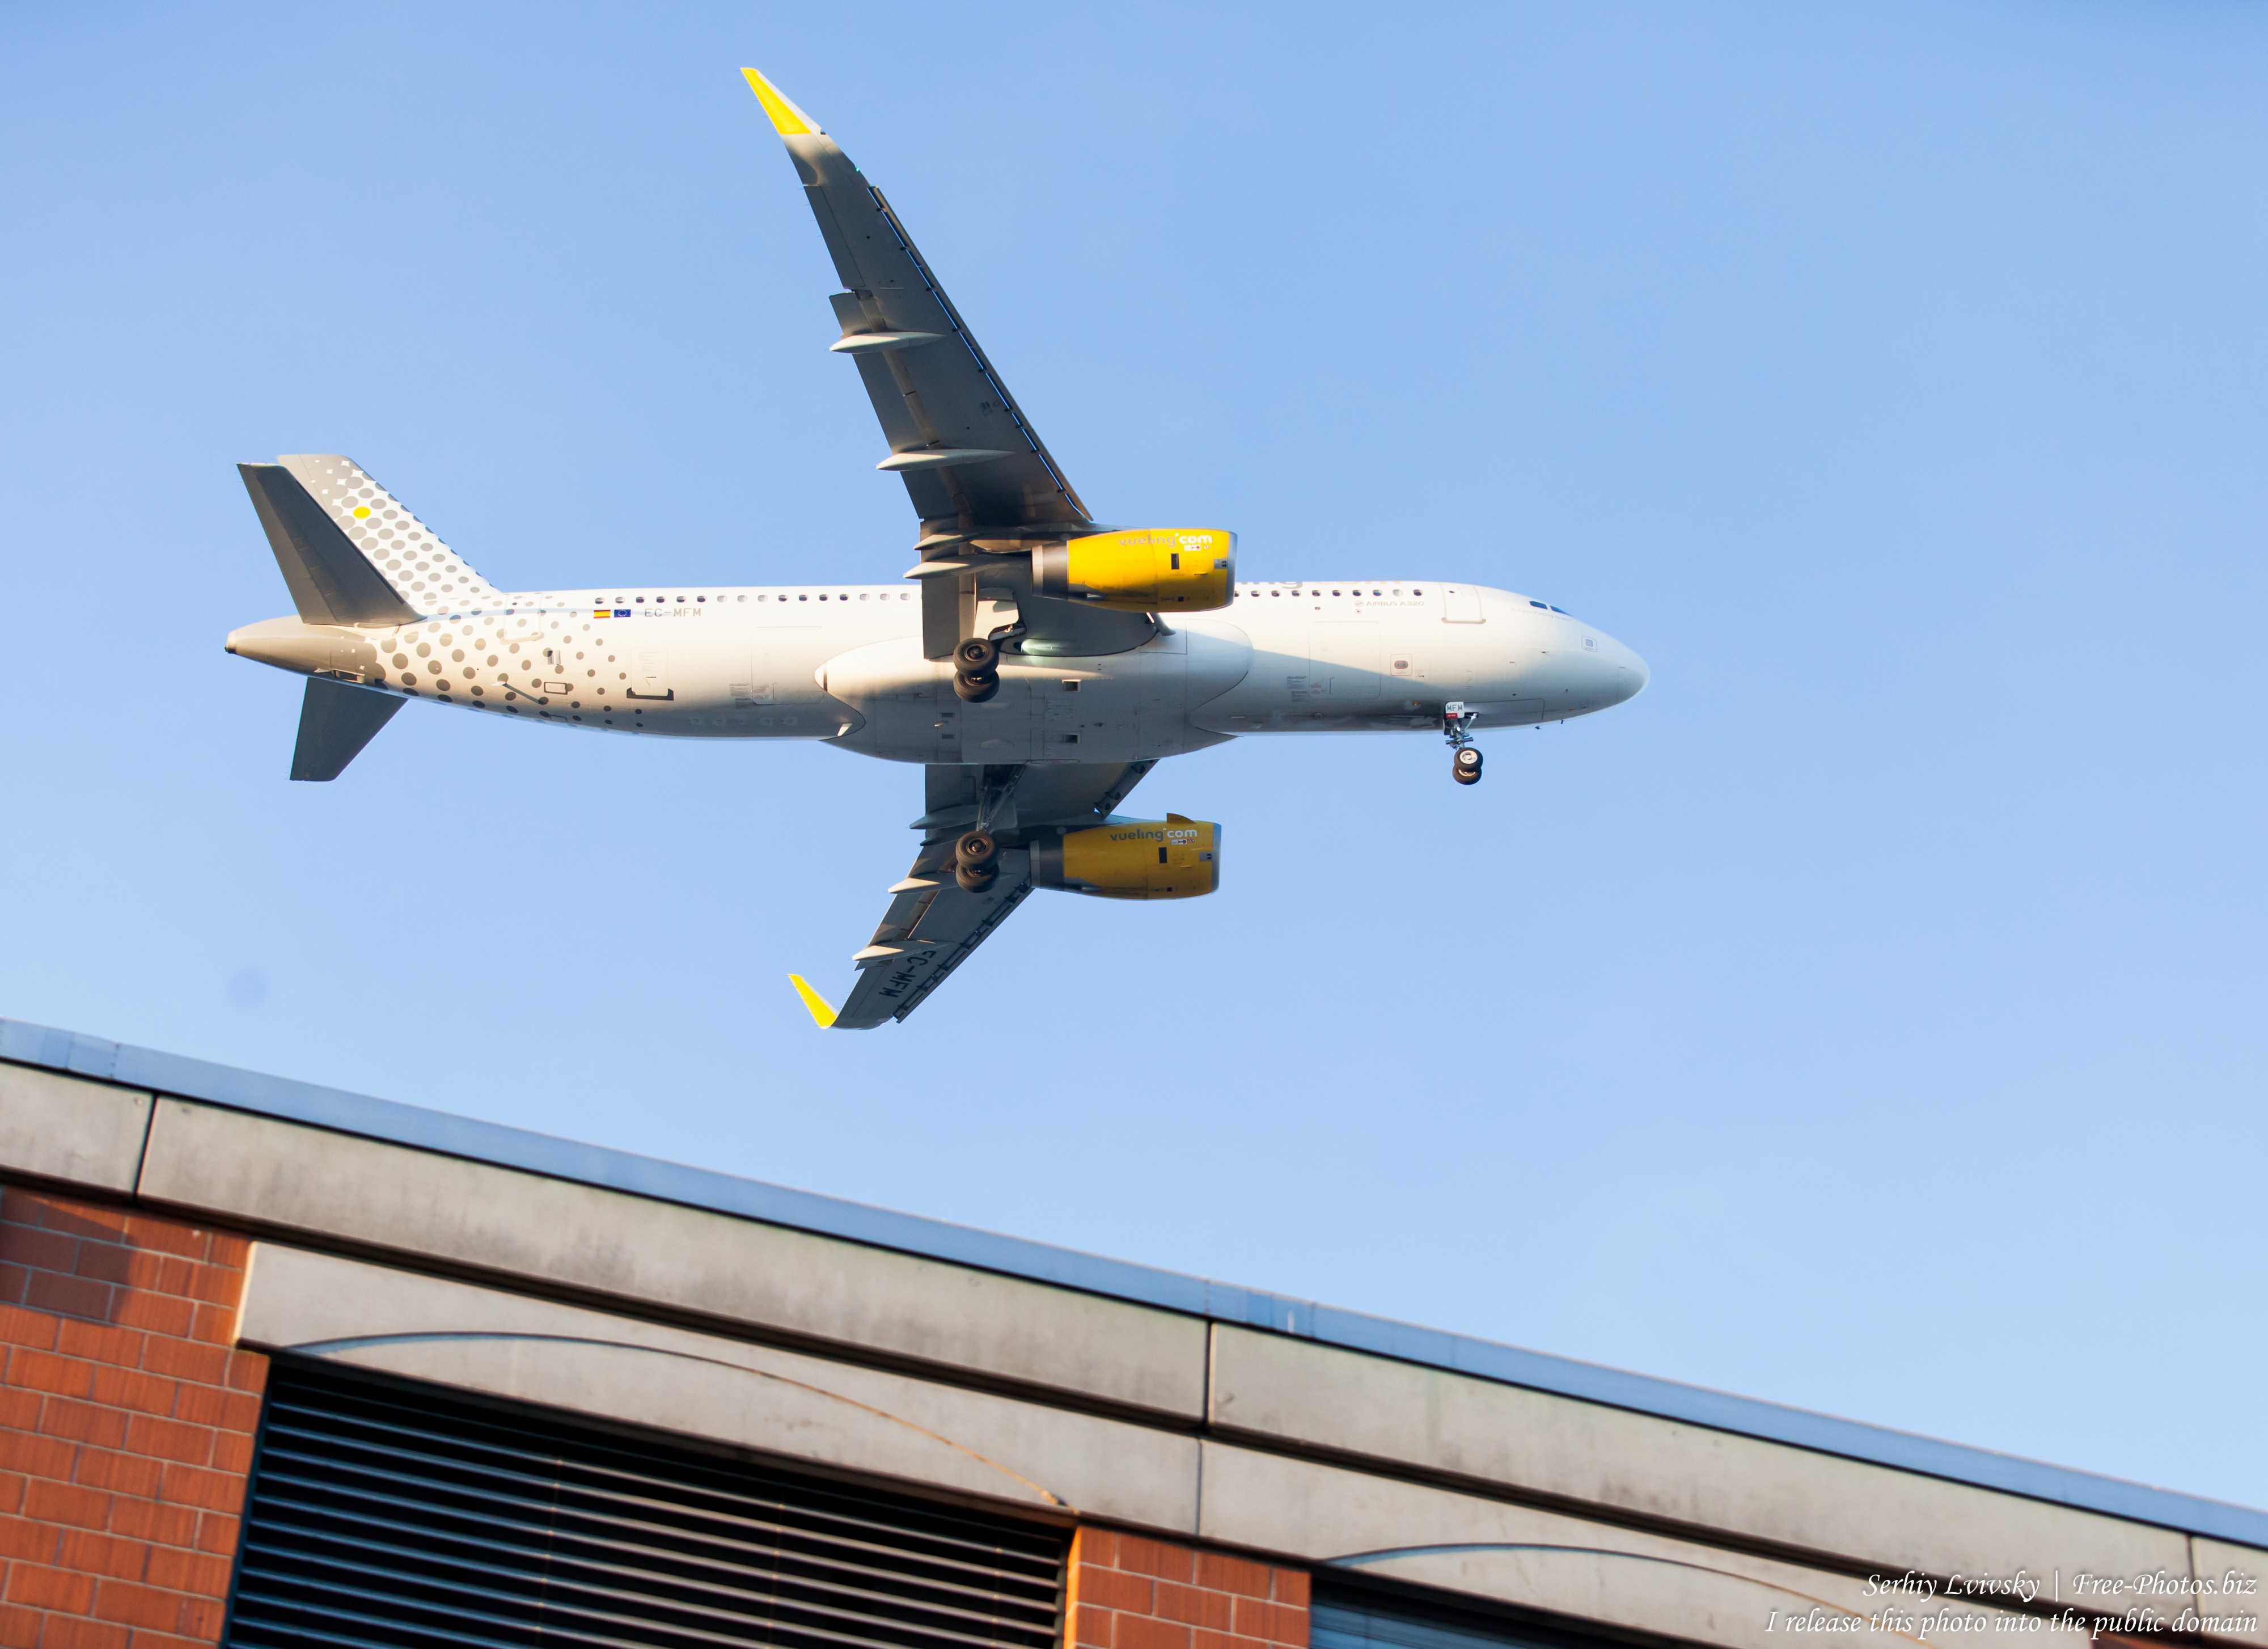 a Vueling Airlines Airbus A320 near Zurich airport in December 2015 photographed by Serhiy Lvivsky, picture 14